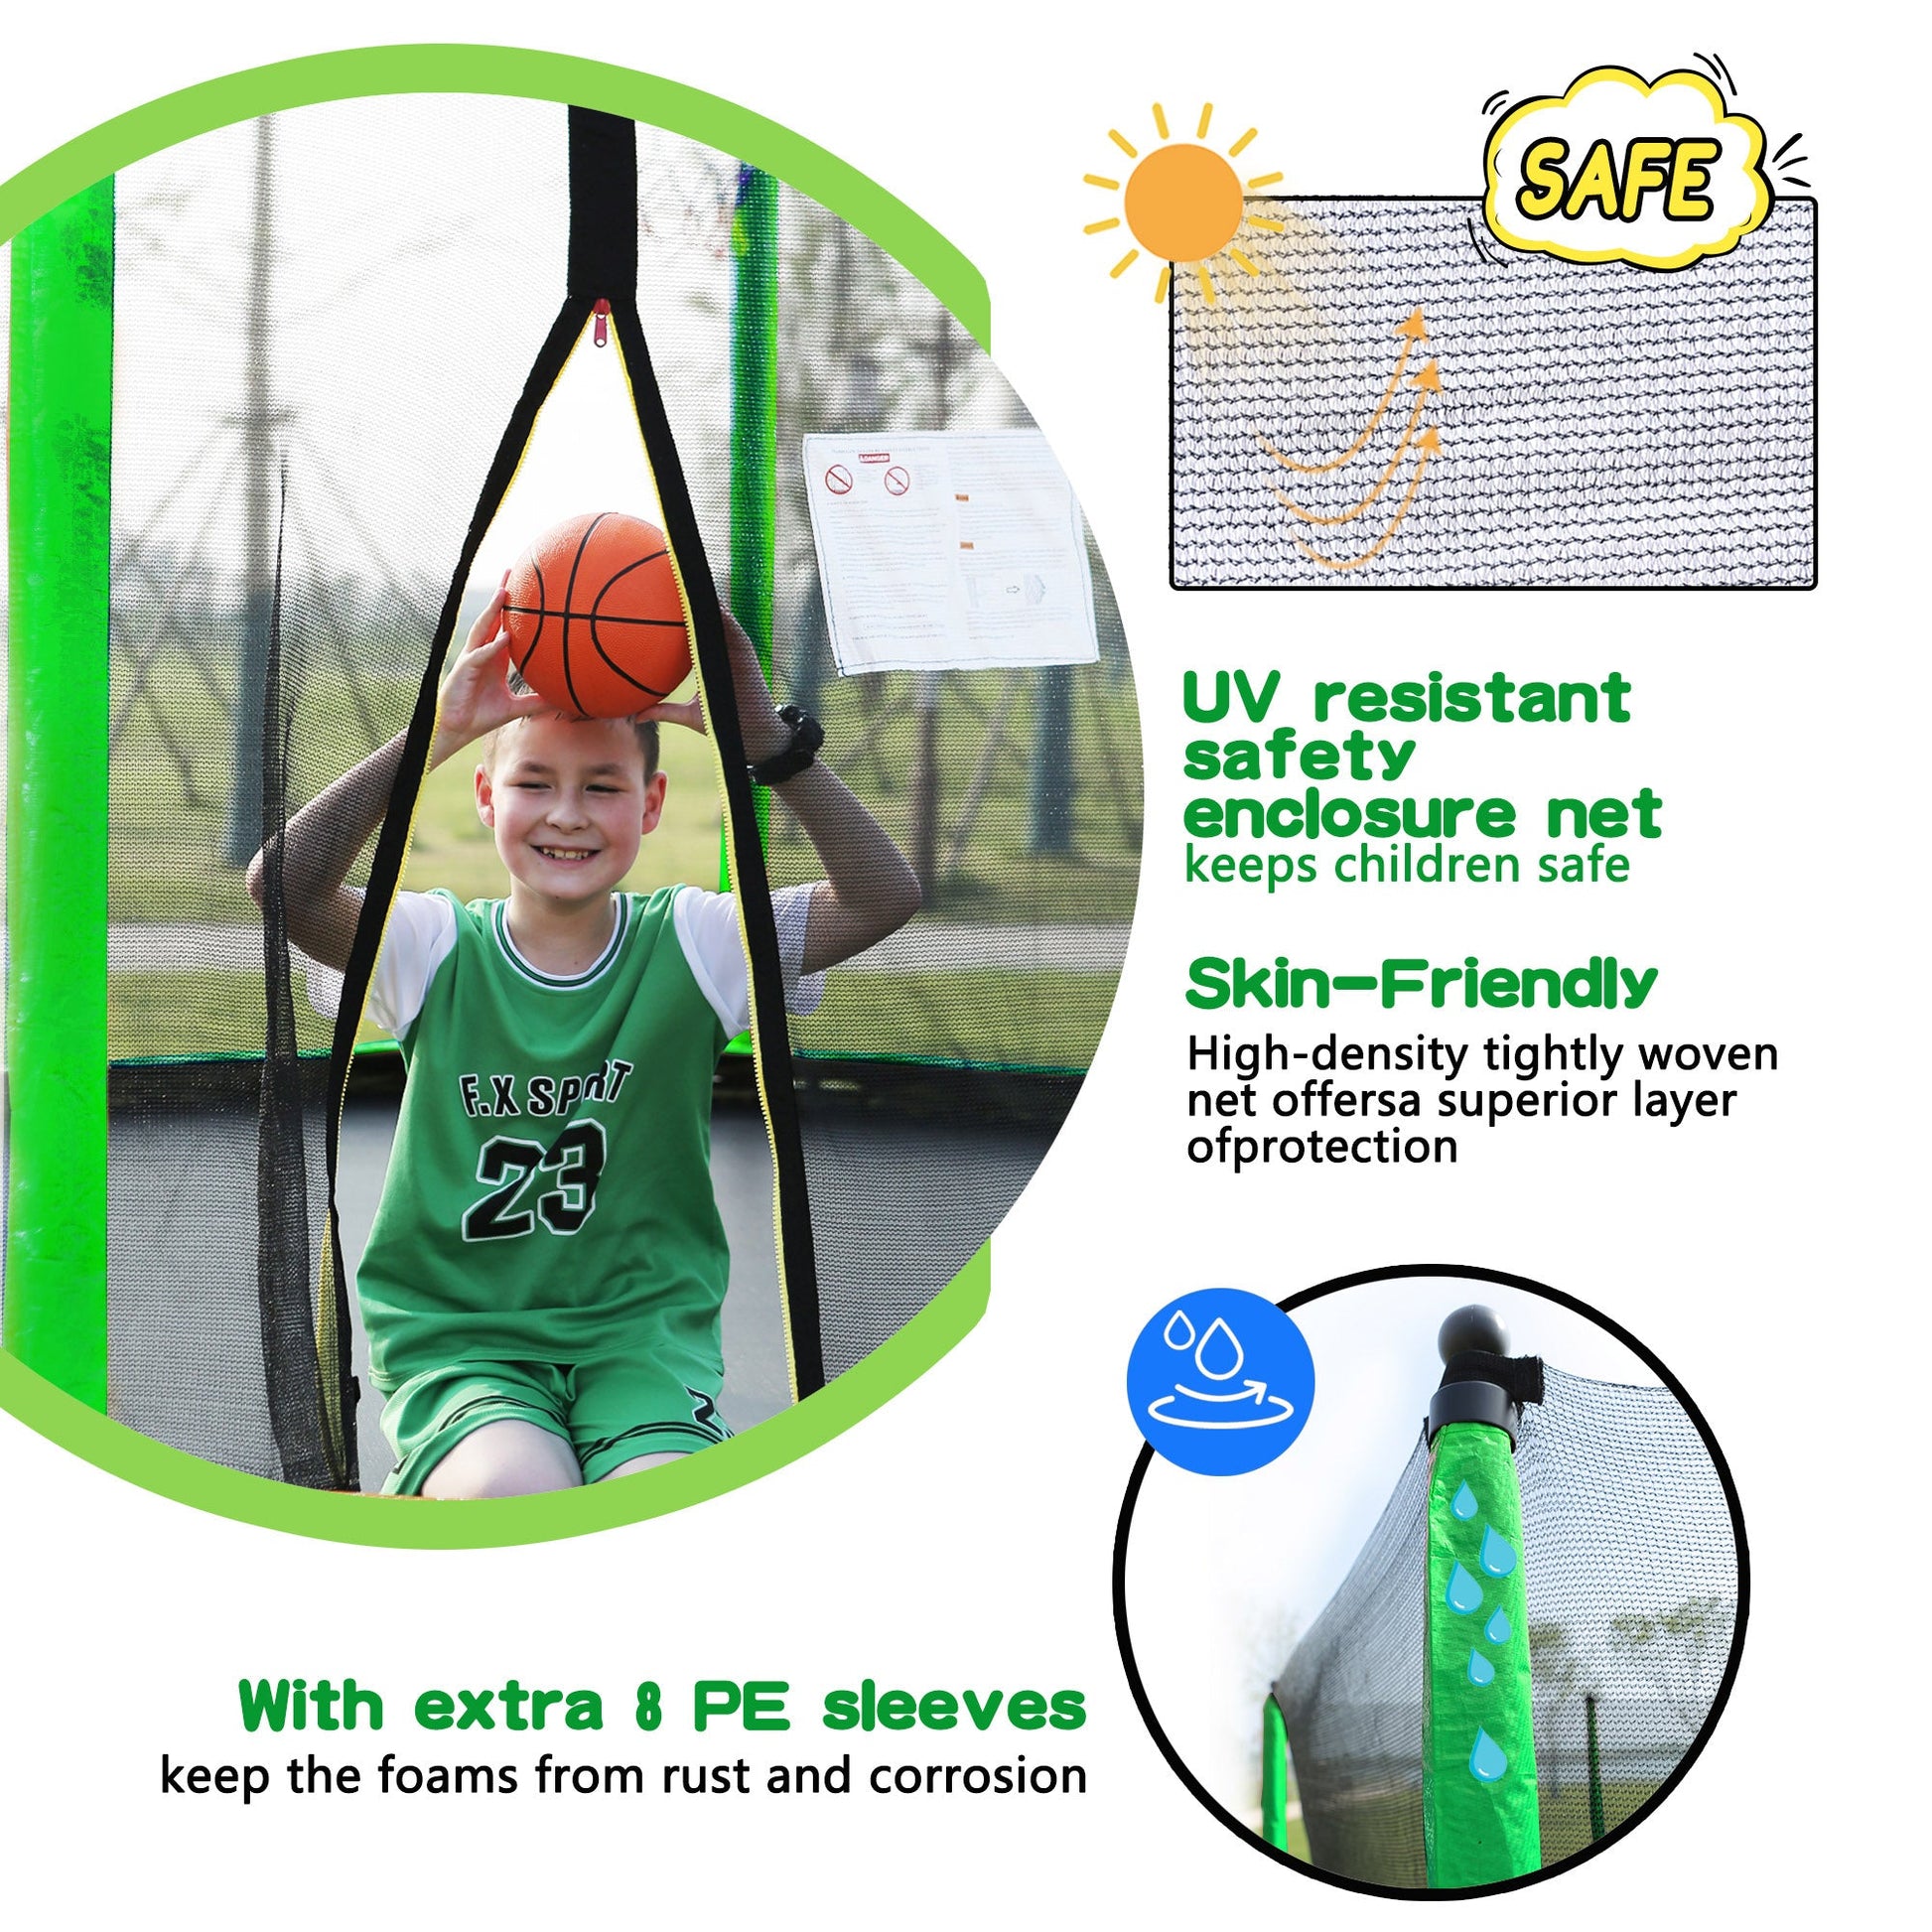 The boy is sitting on a green trampoline and holding a basketball with the text next to it saying: UV resistant safety enclosure net keeps children safe, skin-friendly, with extra 8 pe sleeves